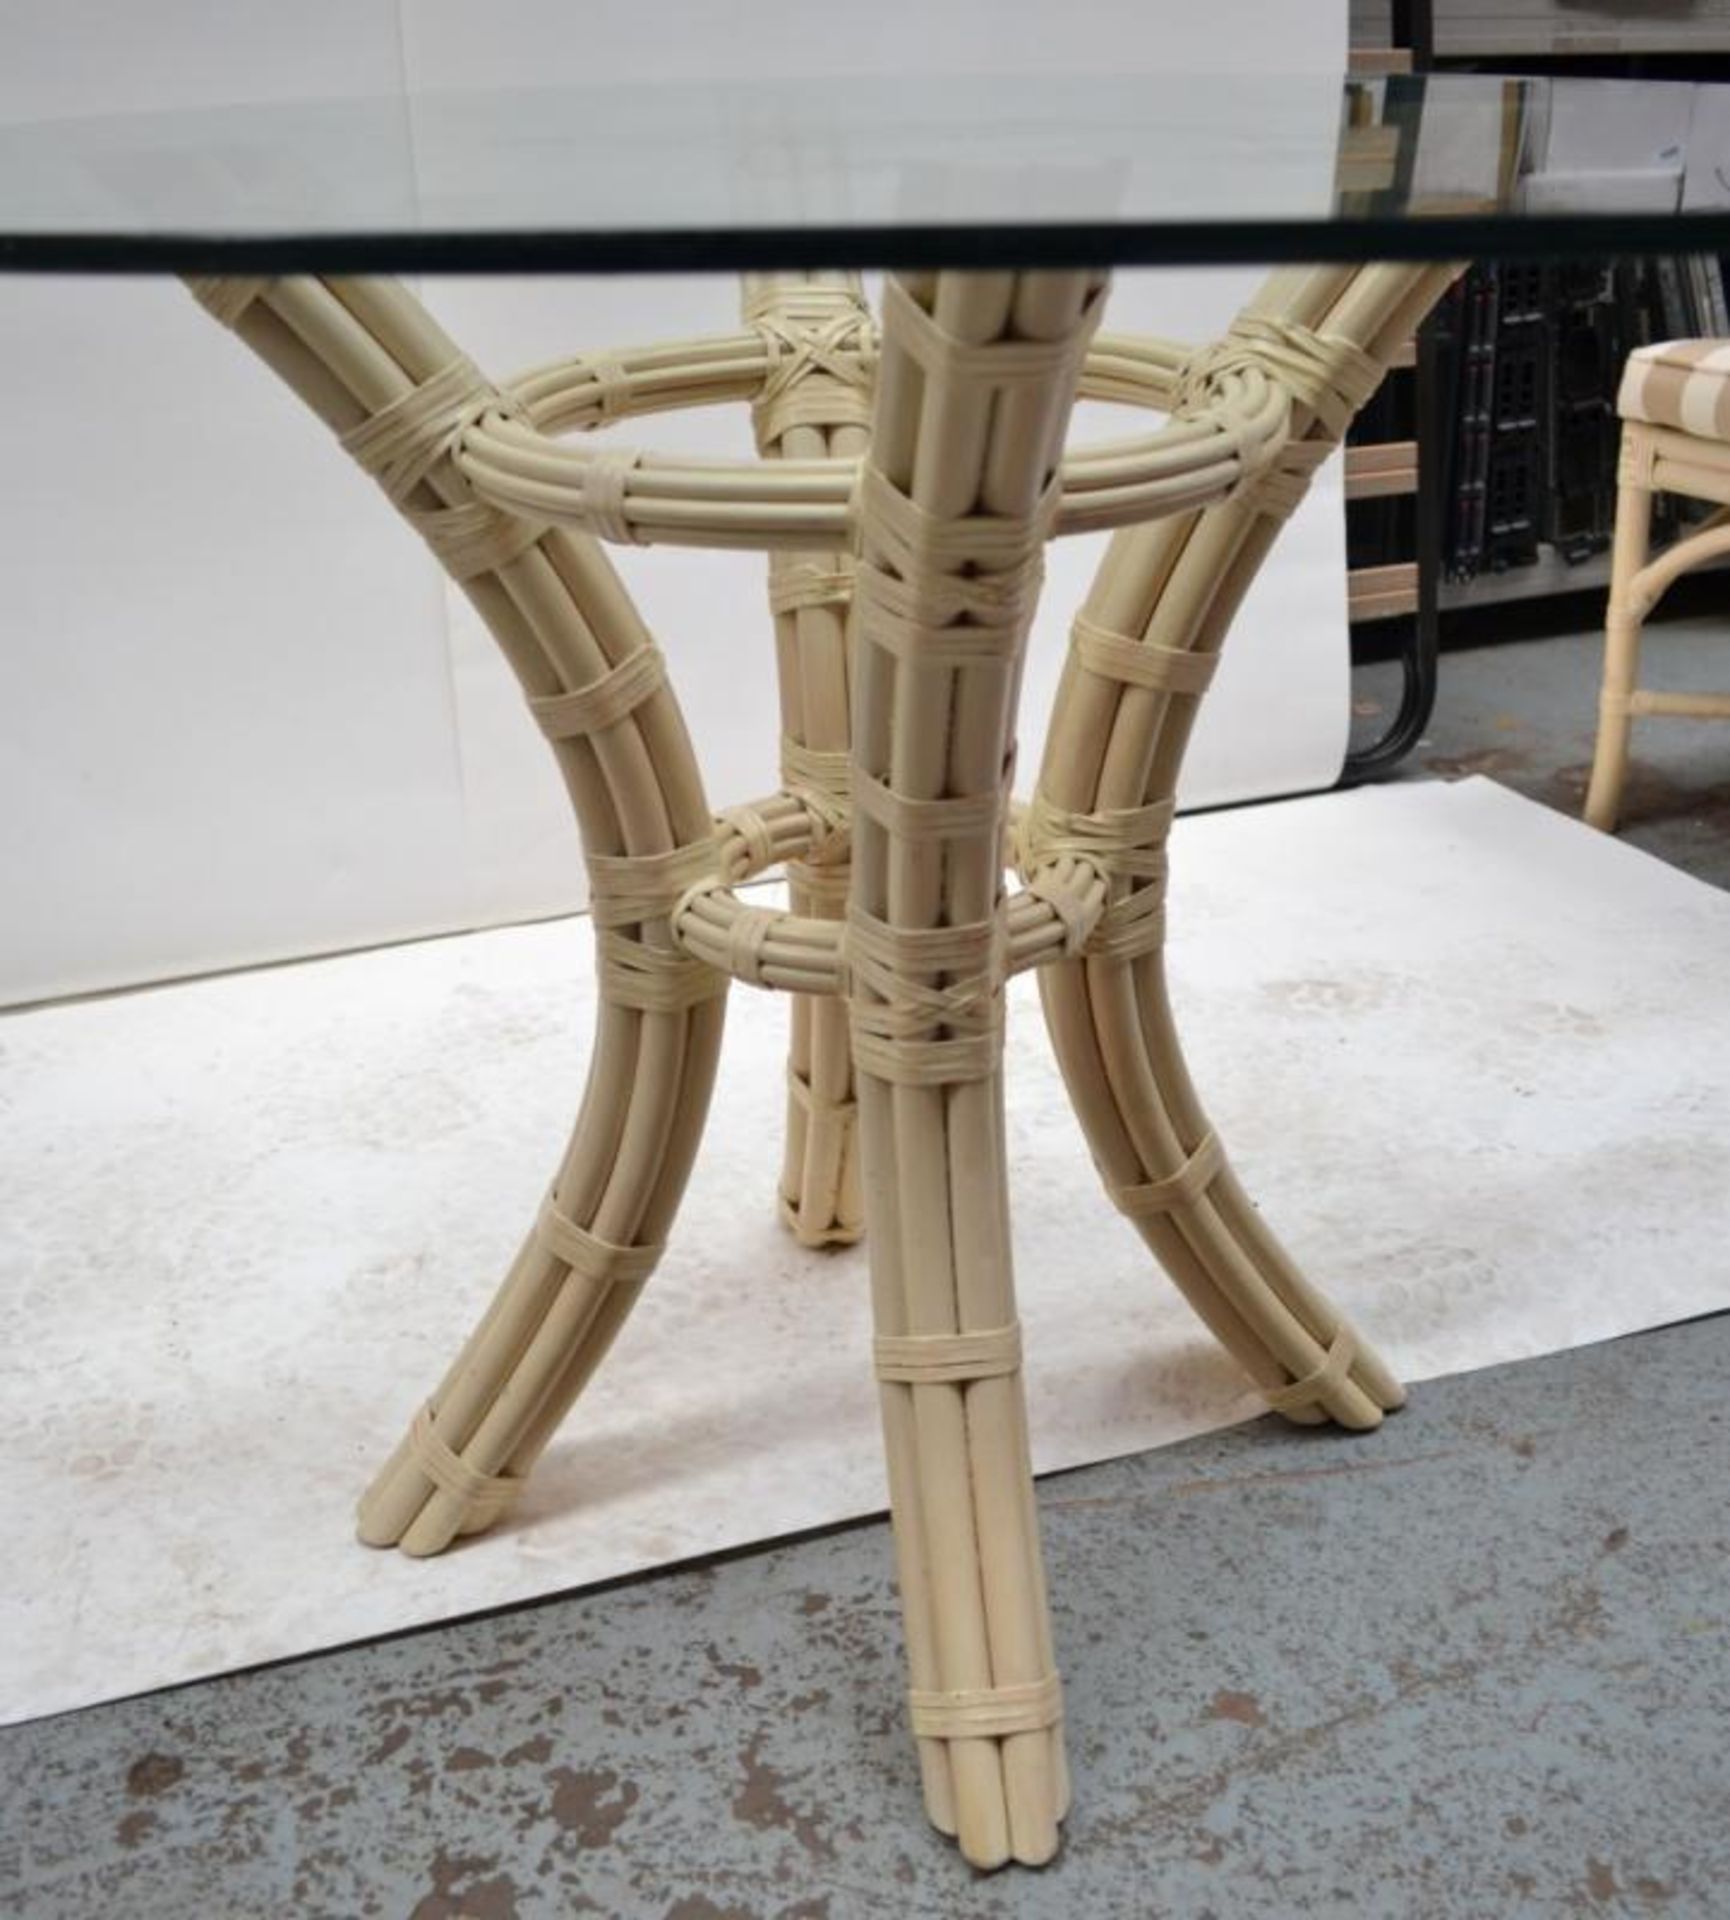 1 x Glass Topped Cane Table with 4 Chairs - Pre-owned In Good Condition - AE010 - CL007 - Location: - Image 5 of 13